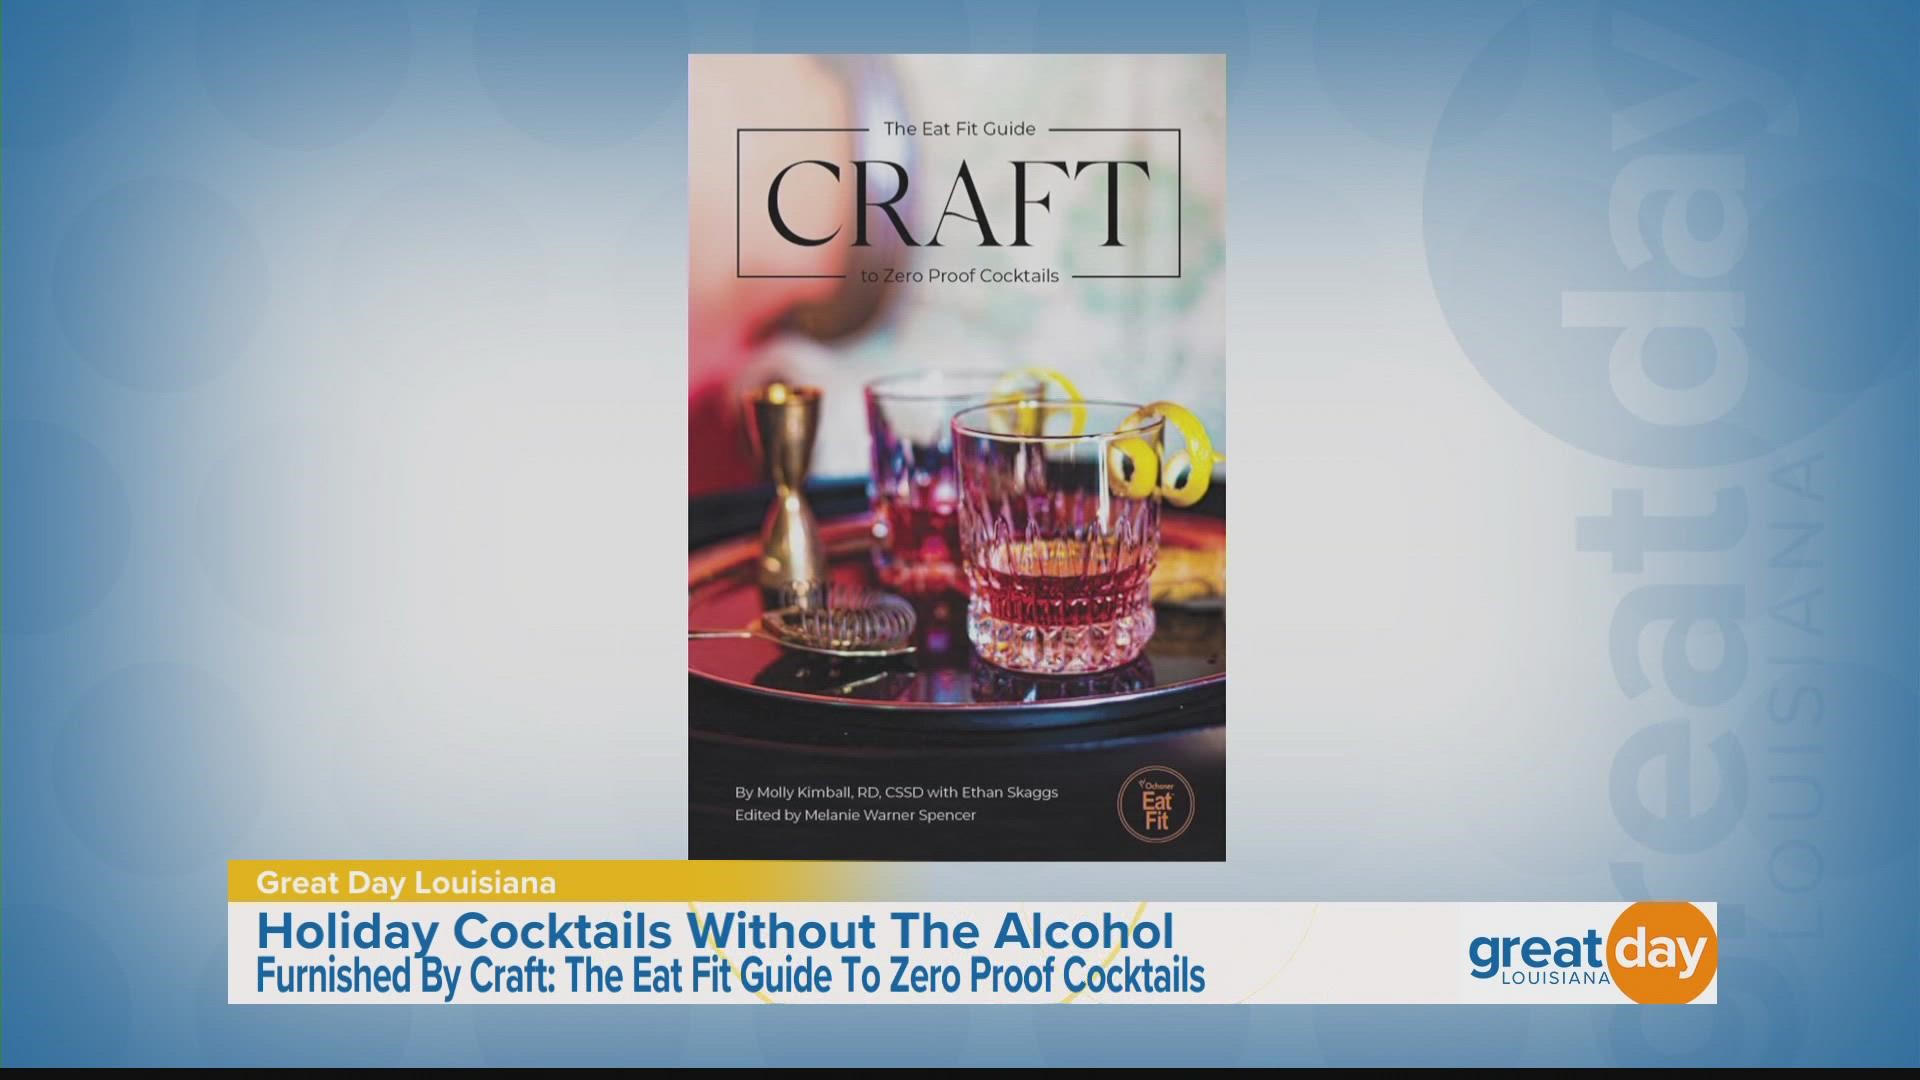 The authors and editor of a new book shared a recipe for a non-alcoholic cocktail.